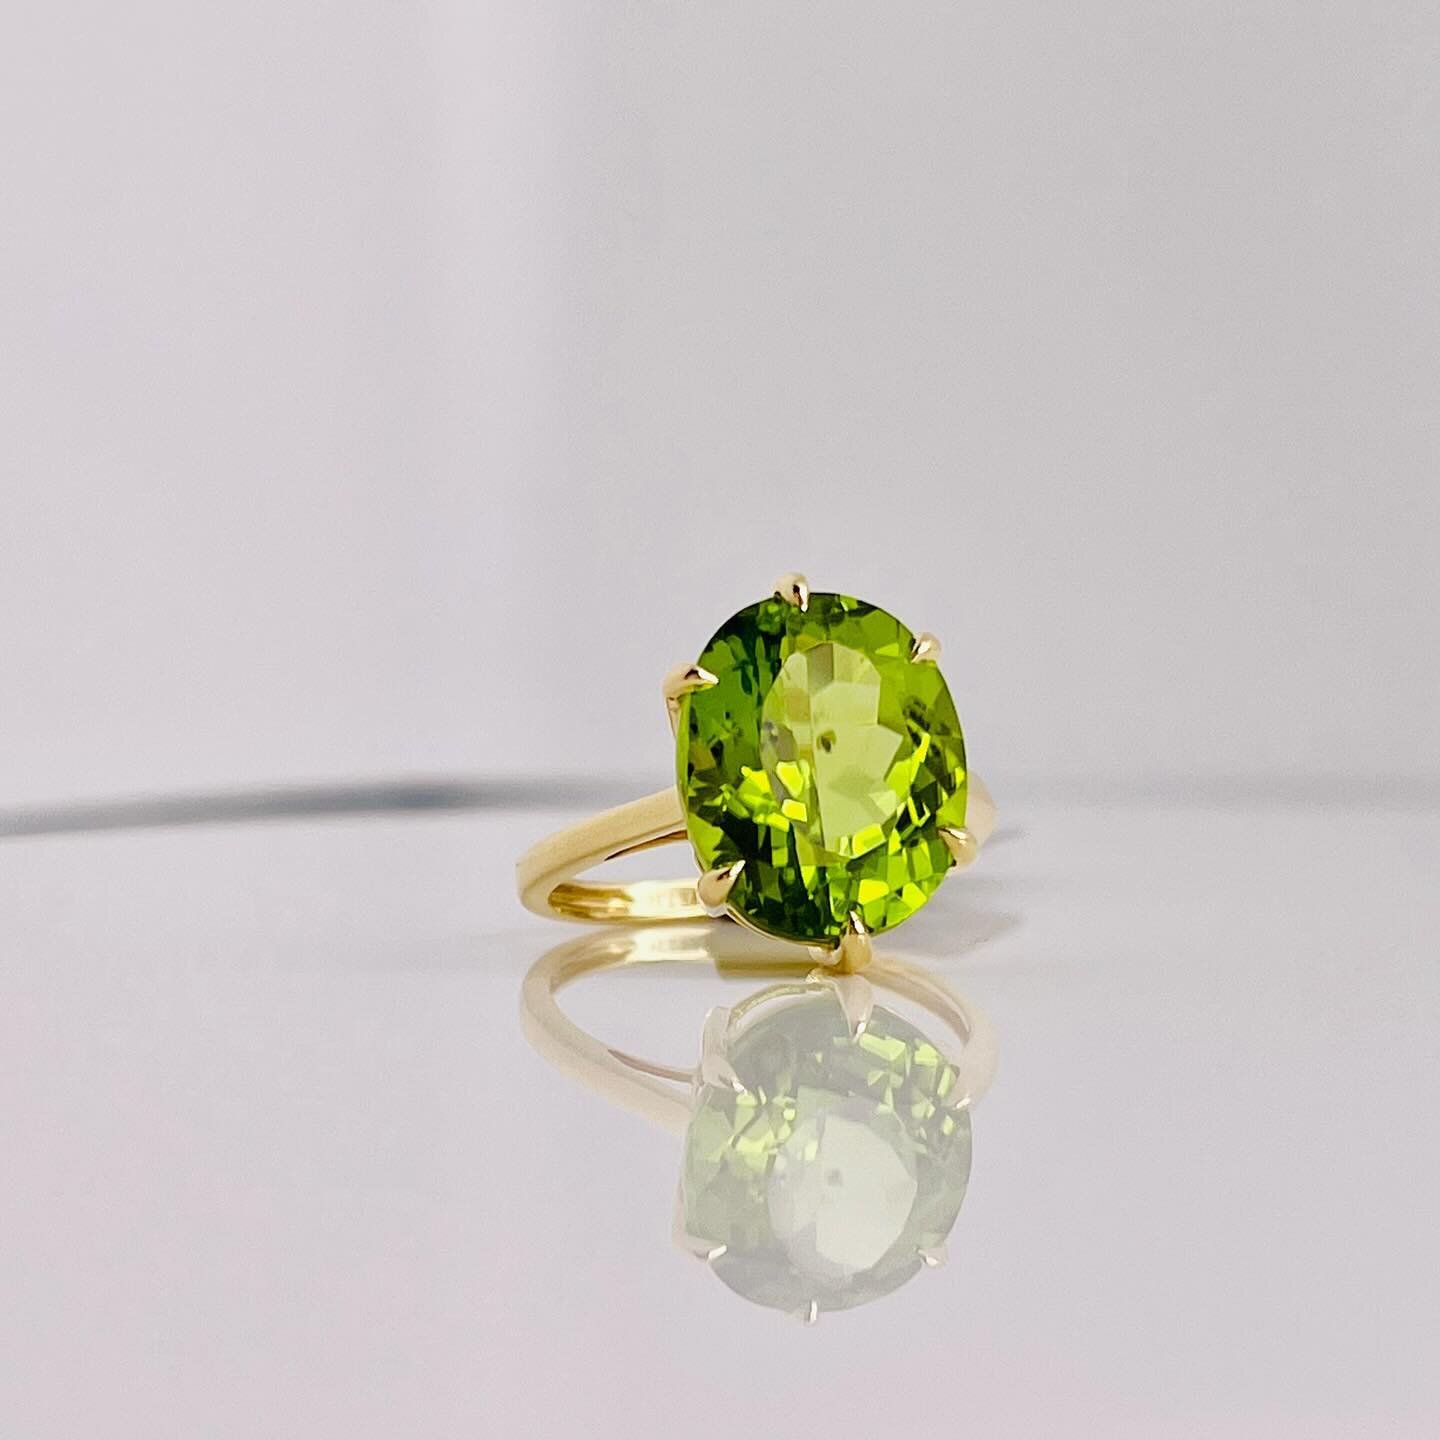 18 karat yellow gold Peridot ring 

Need more information?
Please message us.

#finejewel #gold #earring #ring #necklace #everyday
#18k #18kgold #18kwhitegold #18kyellowgold #whitegold #jewellery #jewelry #canadianmade #craftsman
#love #vyi #localbus